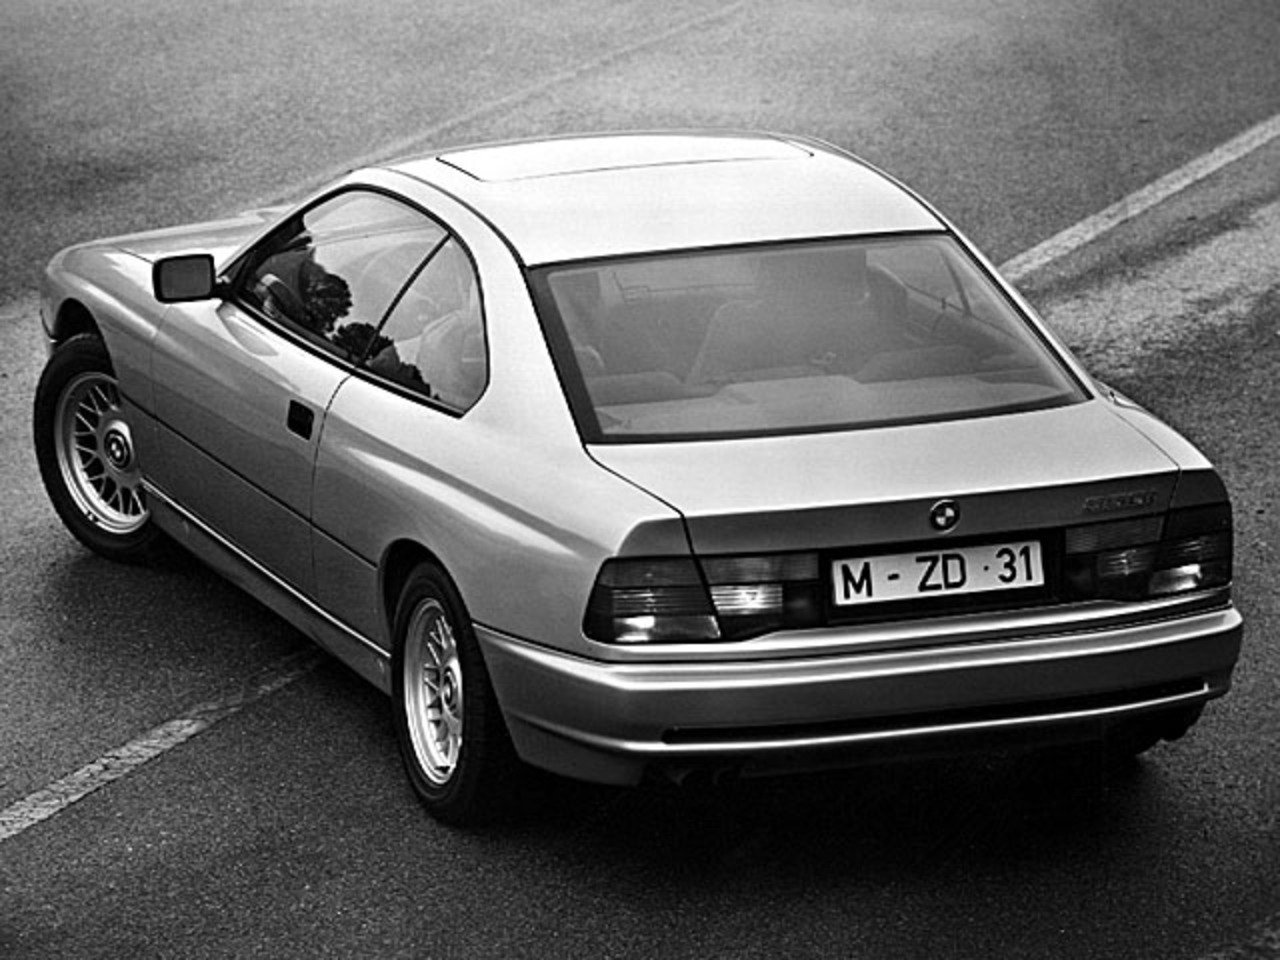 BMWâ„¢ 850i {E31} (1989) - Pictures